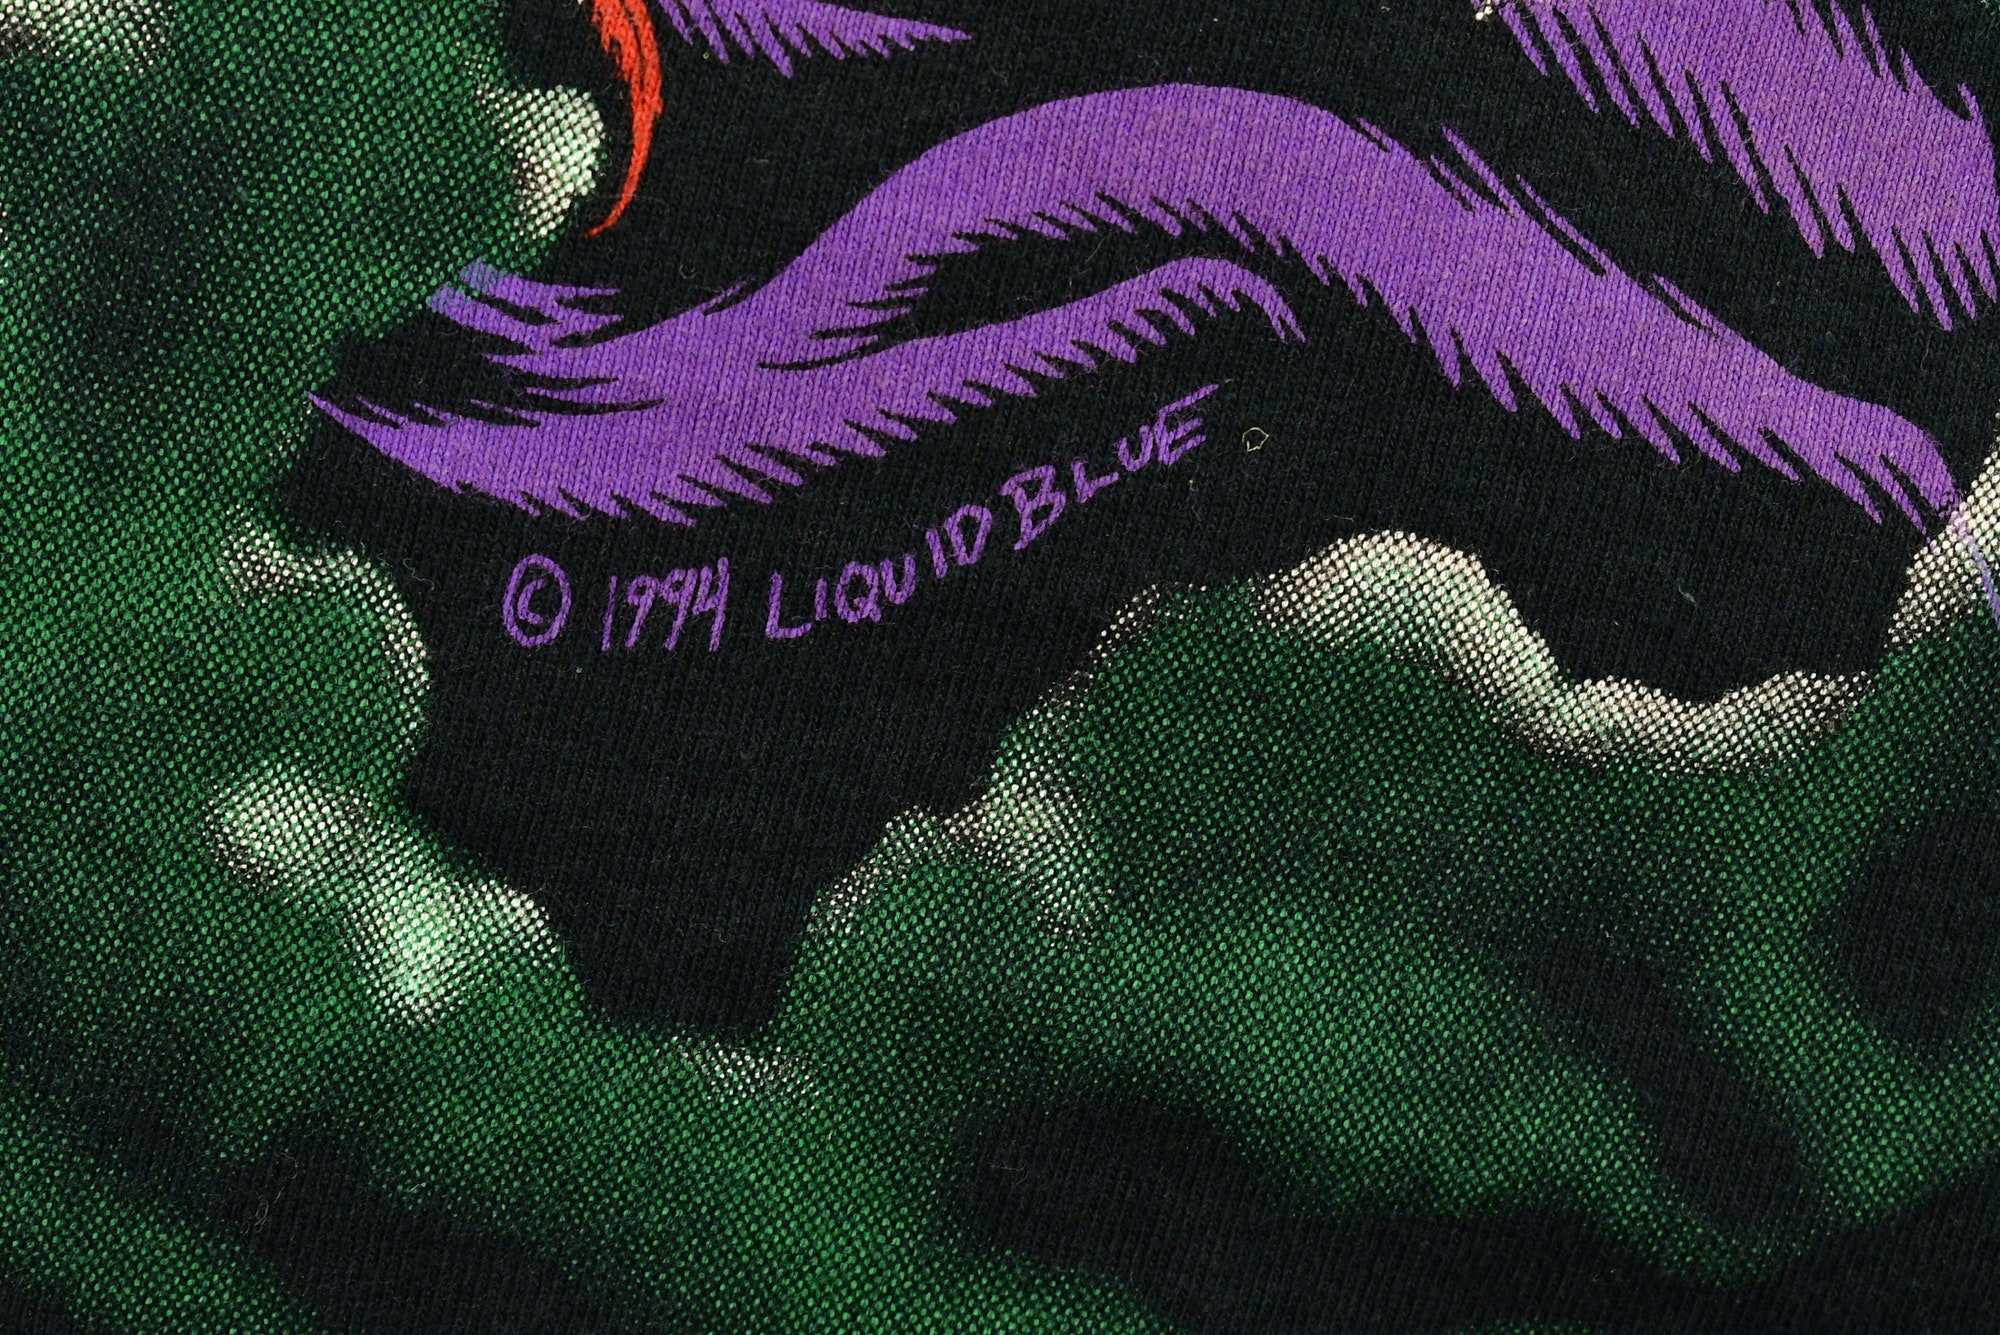 Vintage 1994 Liquid Blue All Over Wizard Graphic Print T-Shirt